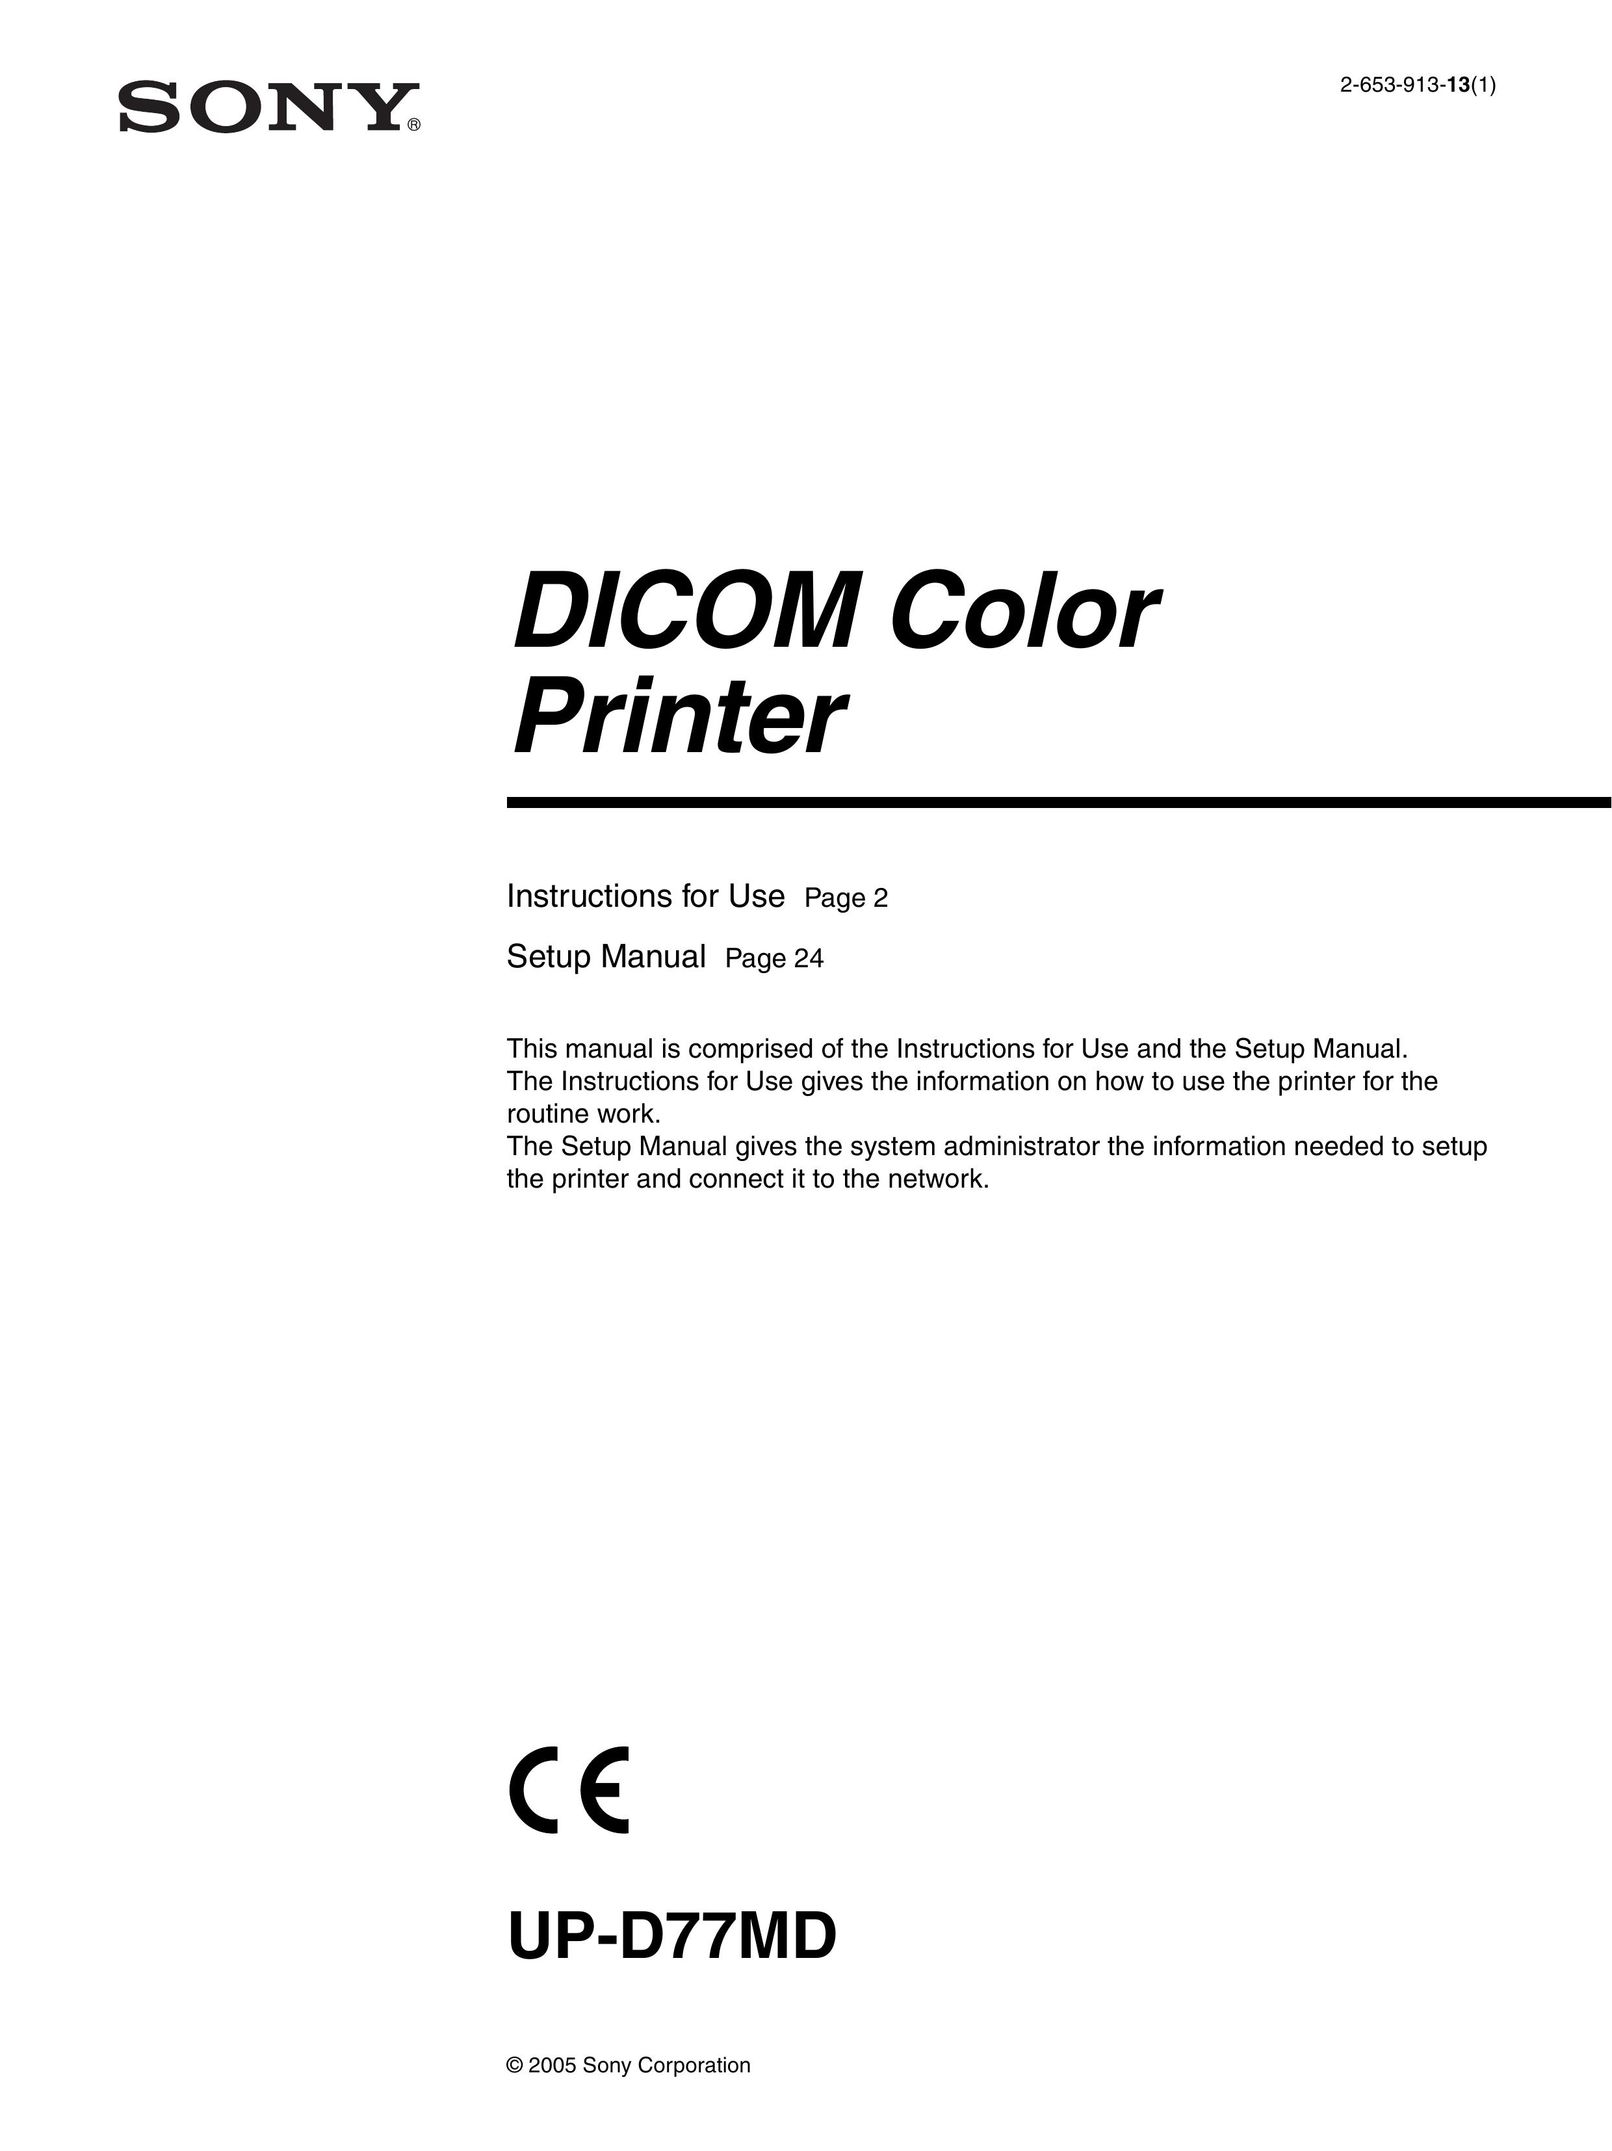 Sony UP-D77MD Printer User Manual